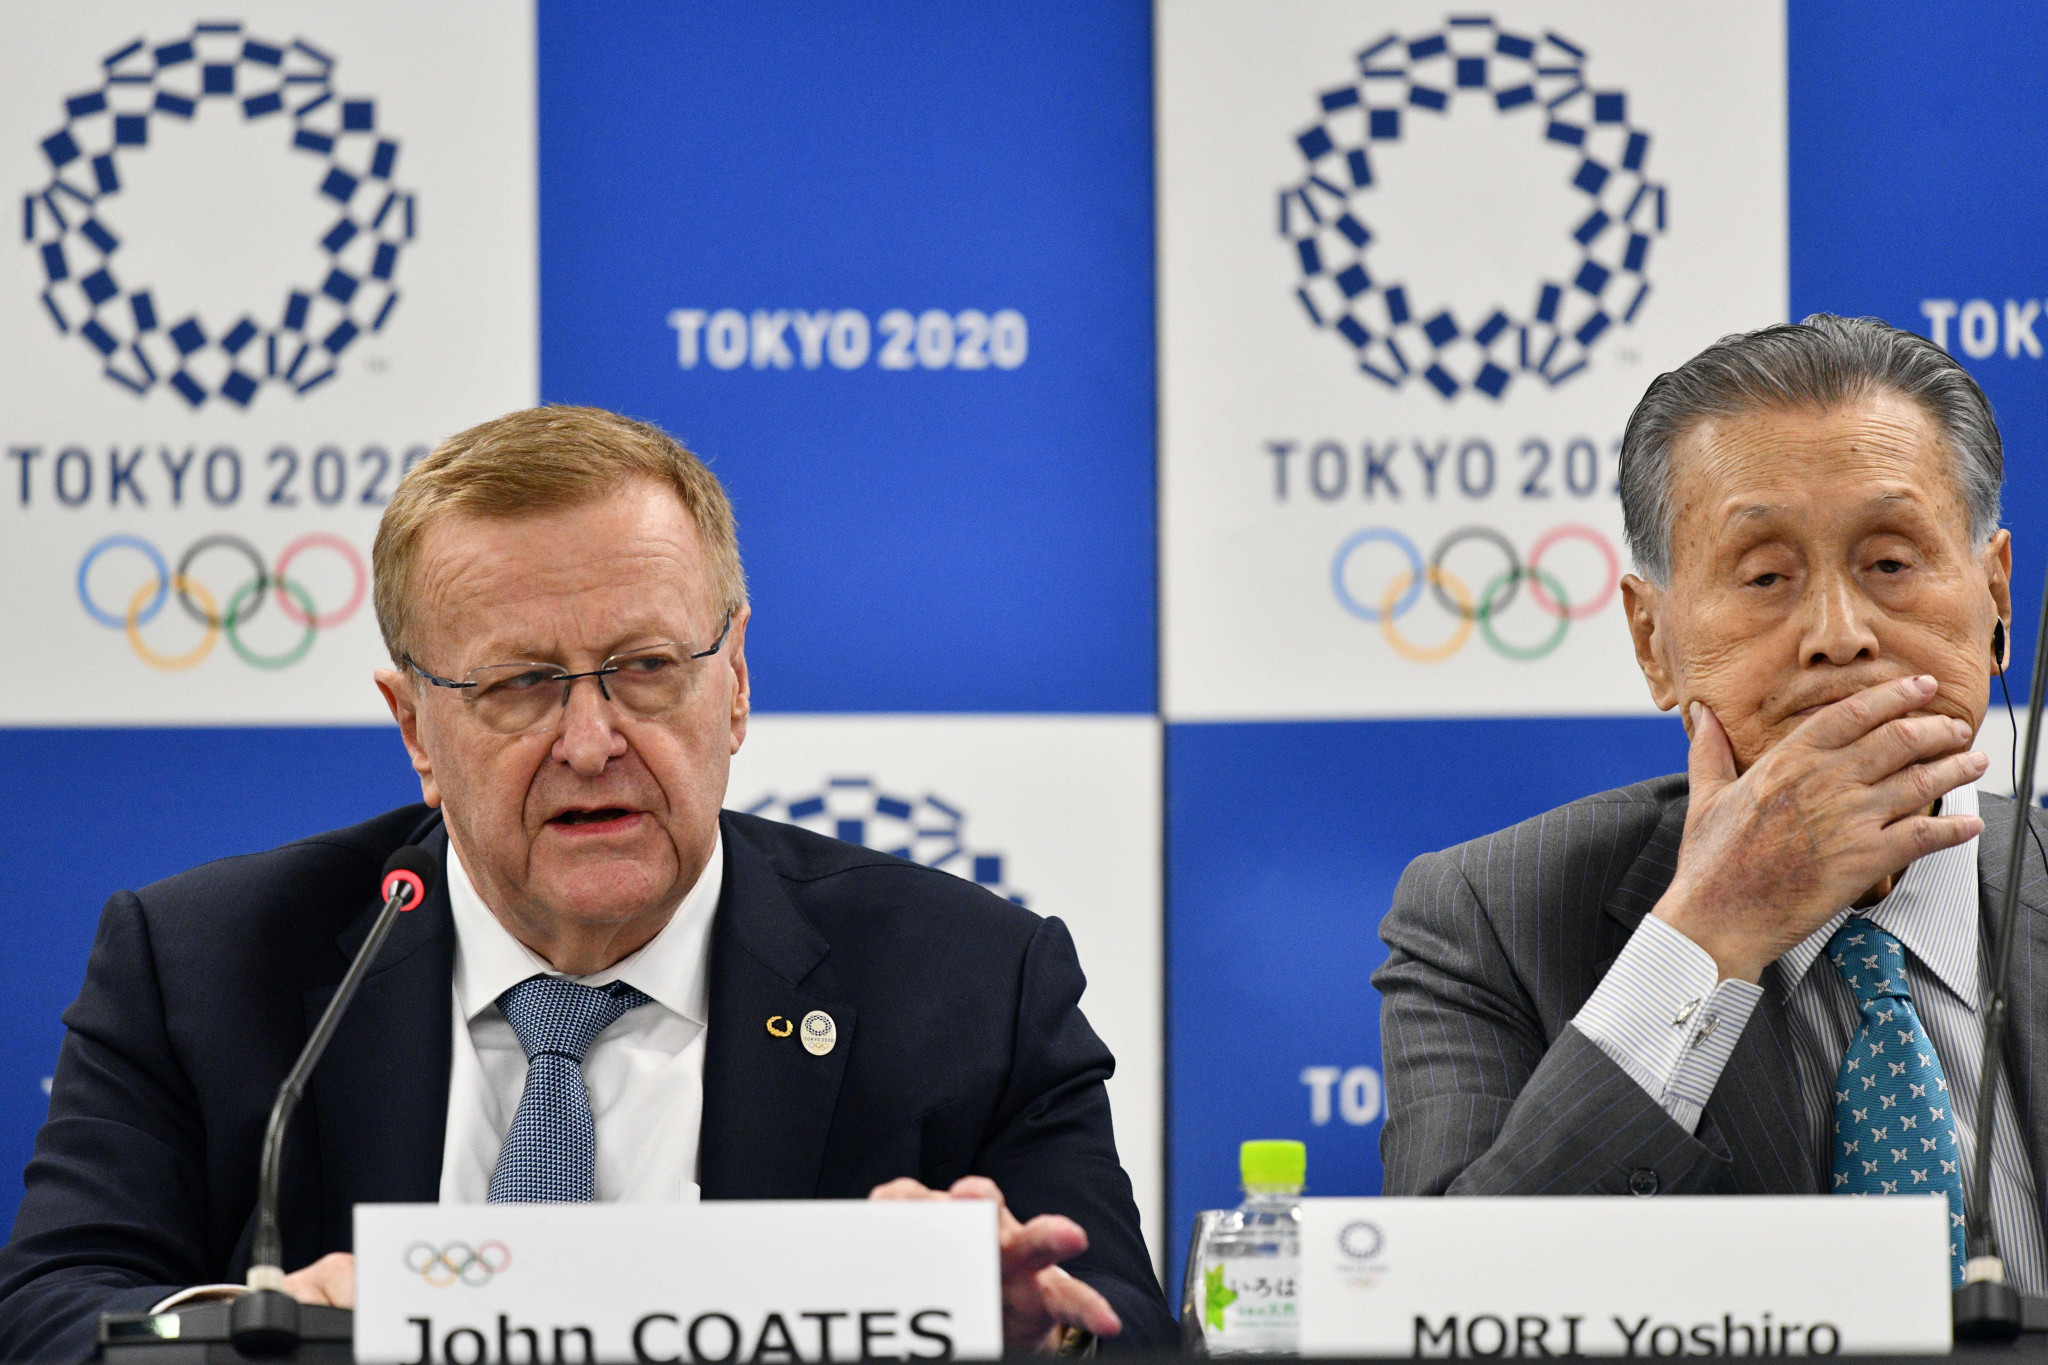 Coates suggests IOC working to clear July and August window for re-arranged Tokyo 2020 next year